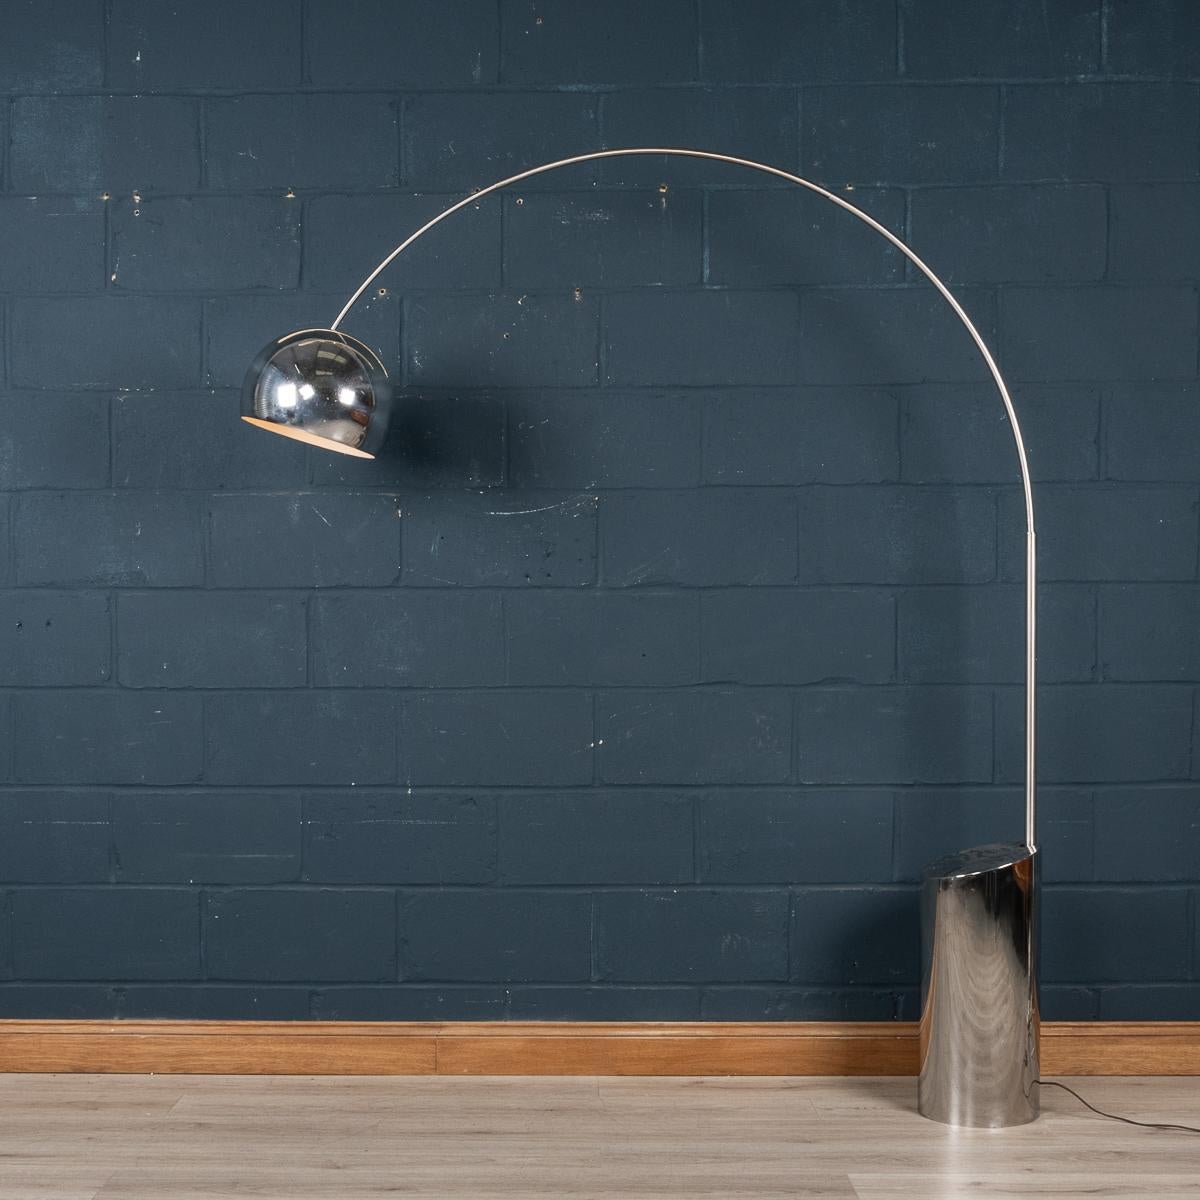 Shining a light on classic 20th century pieces, this item of mid-century lighting from Italy oozes charm and sophistication. Dates to the 1970s it is produced by the renowned Italian firm Reggiani.

CONDITION
Rust to one of the screws at the base